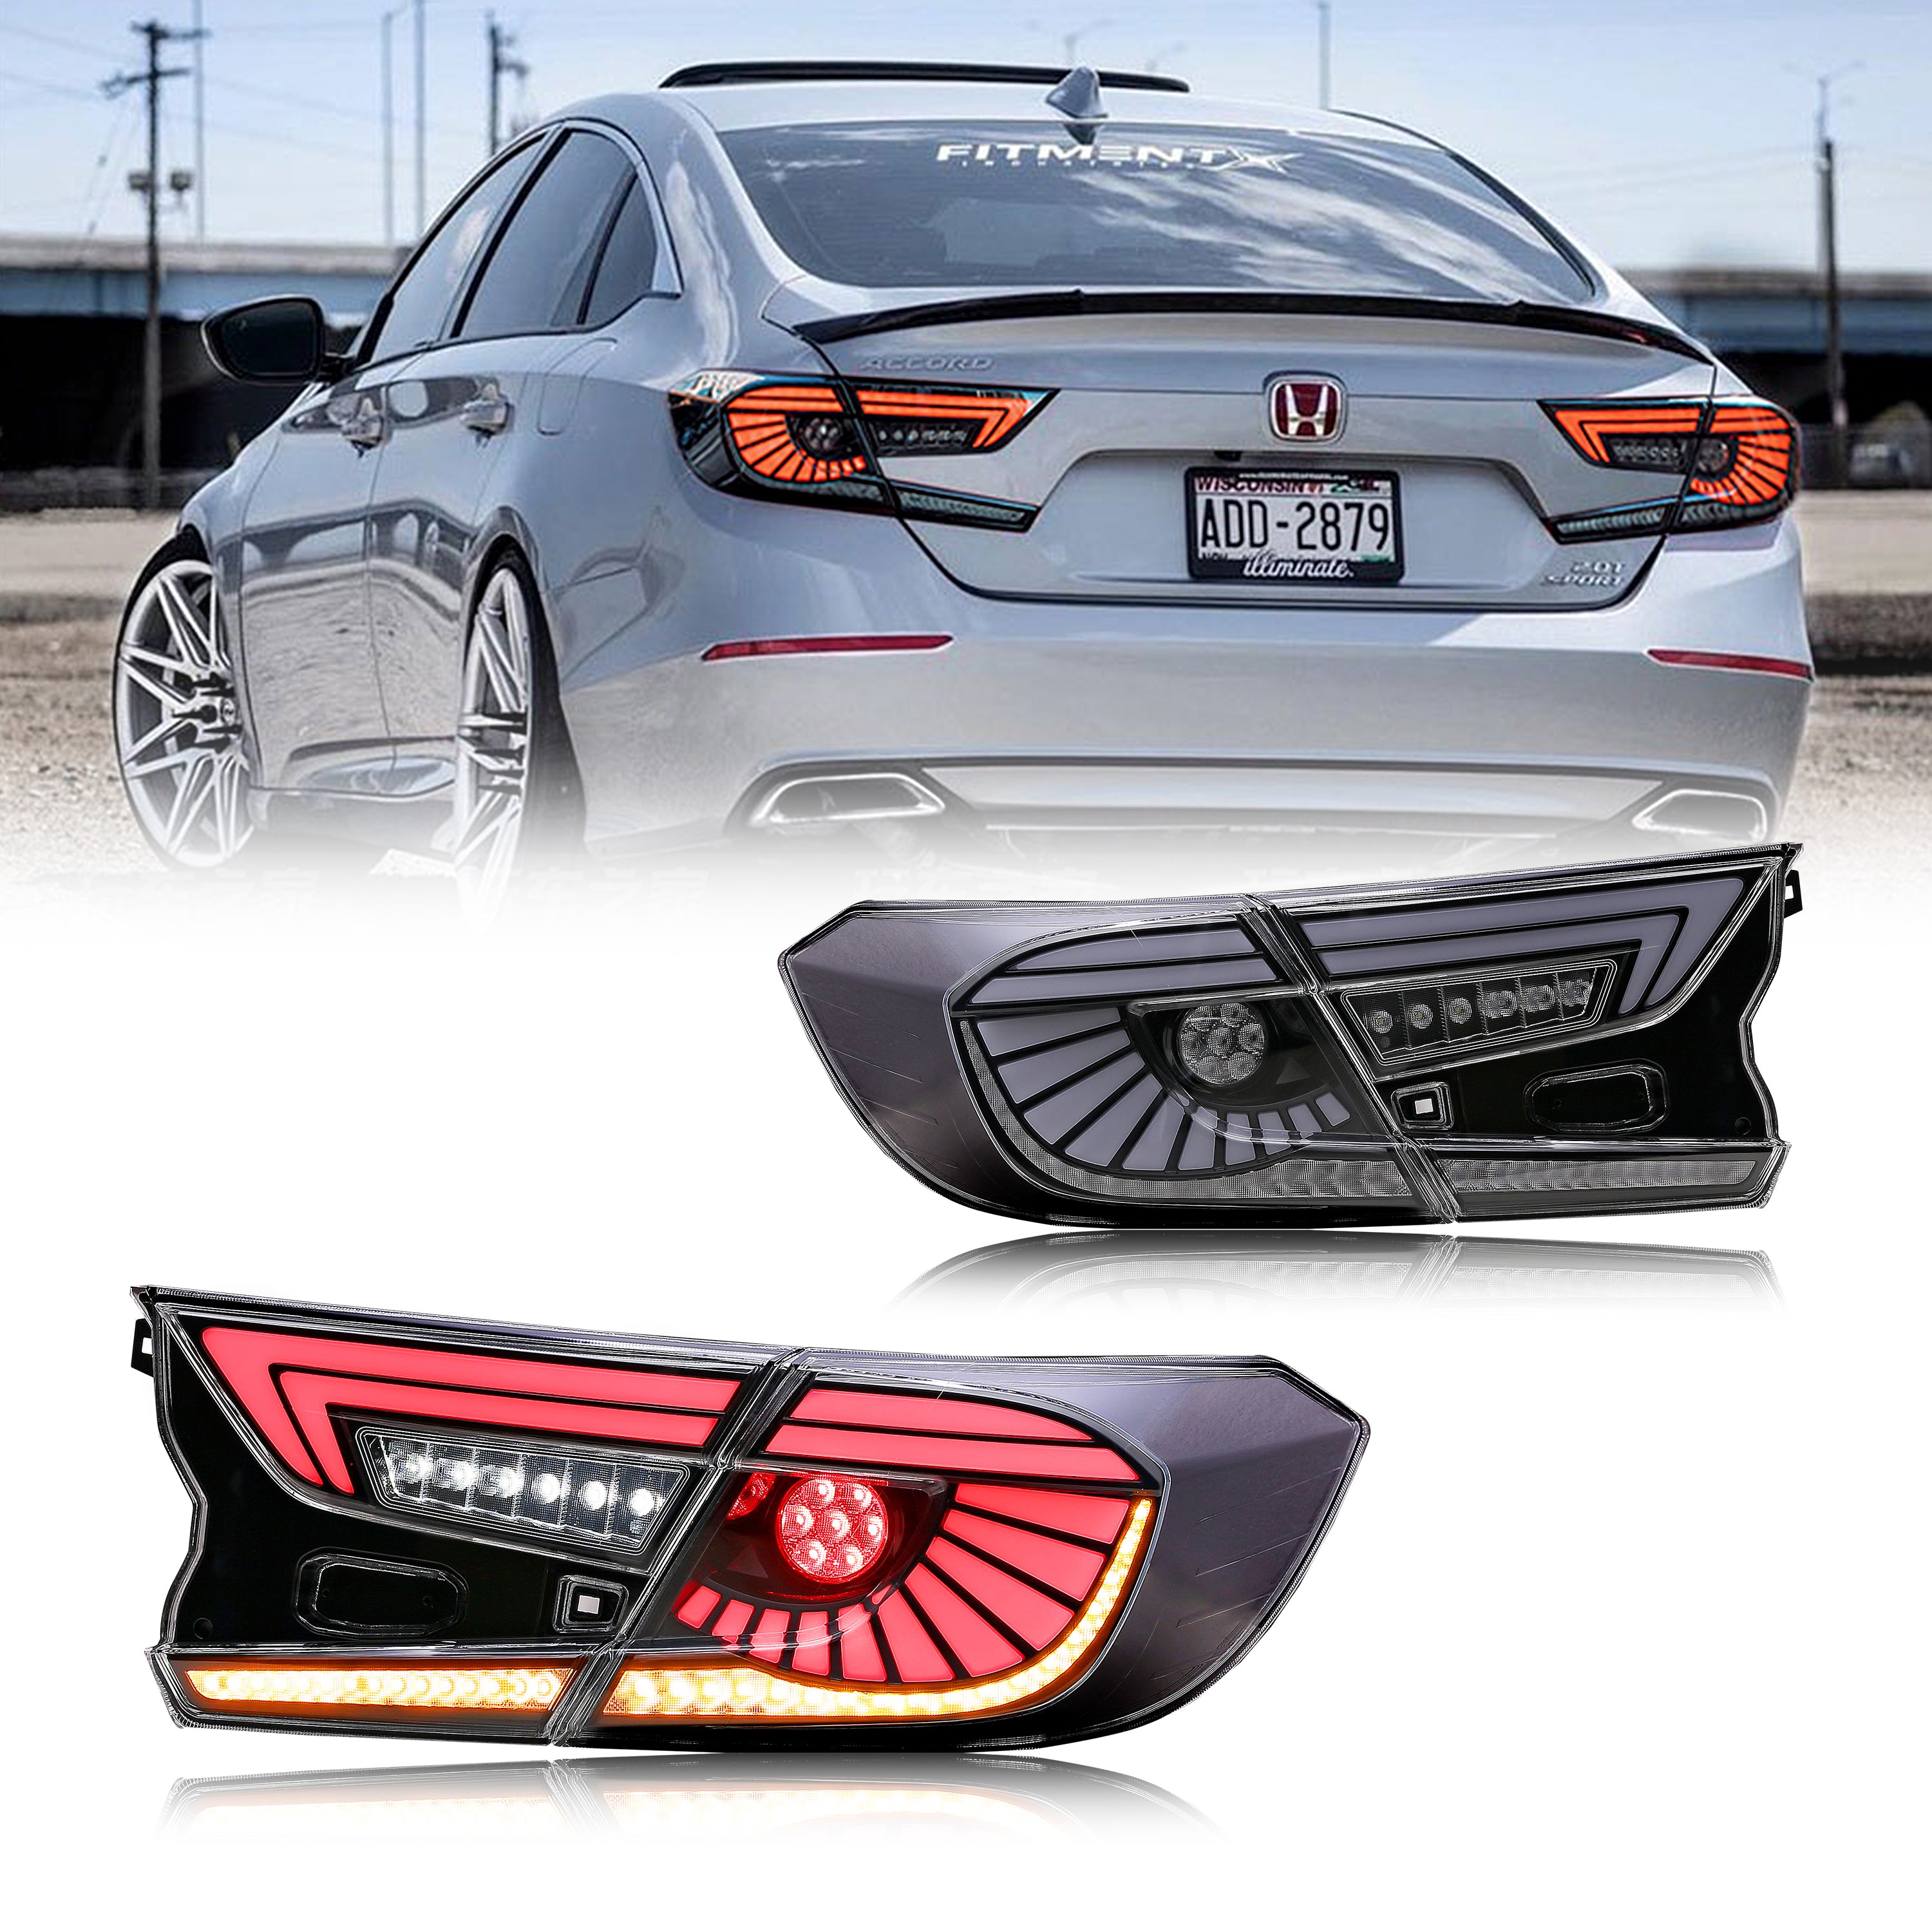 inginuity time LED Clear White Eagle Eye V6 Tail Lights for Honda Accord  10th Gen 2018 2019 2020 2021 2022 Animation DRL Sequential Indicator Rear 